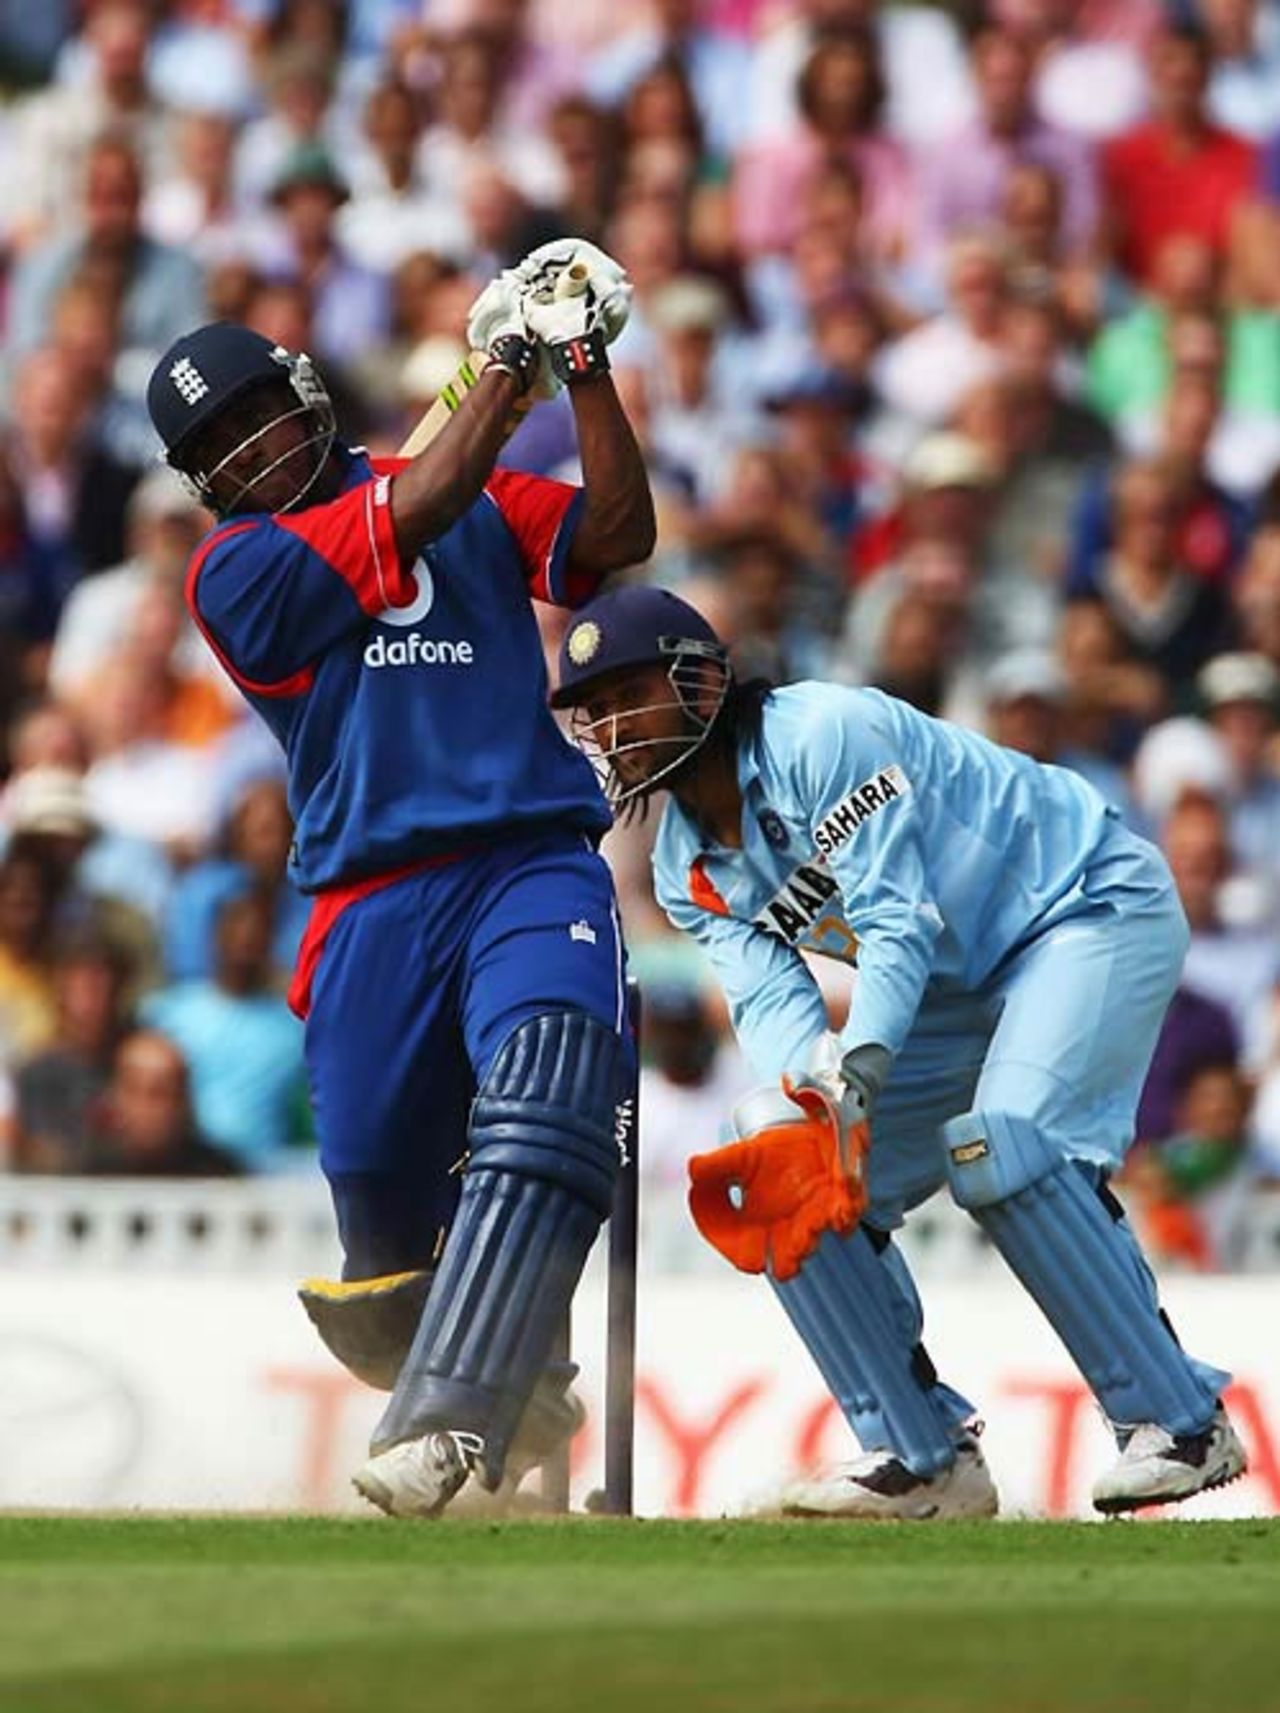 Dimitri Mascarenhas smashed five consecutive sixes in the final over, England v India, 6th ODI, The Oval, September 5, 2007